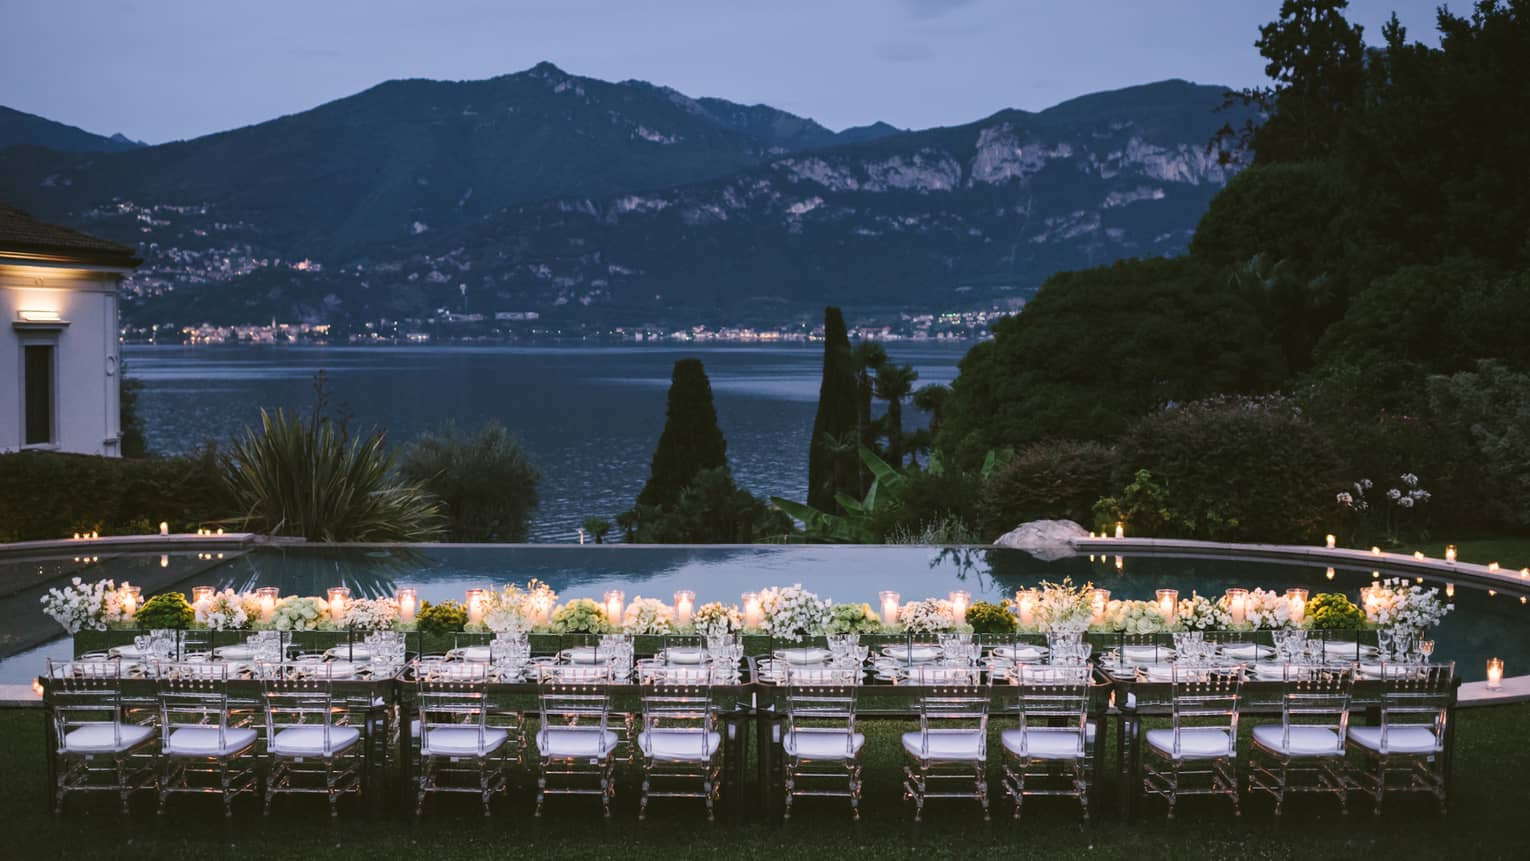 Long outdoor dining table with flowers, glowing candles by Lake Como, mountains at dusk